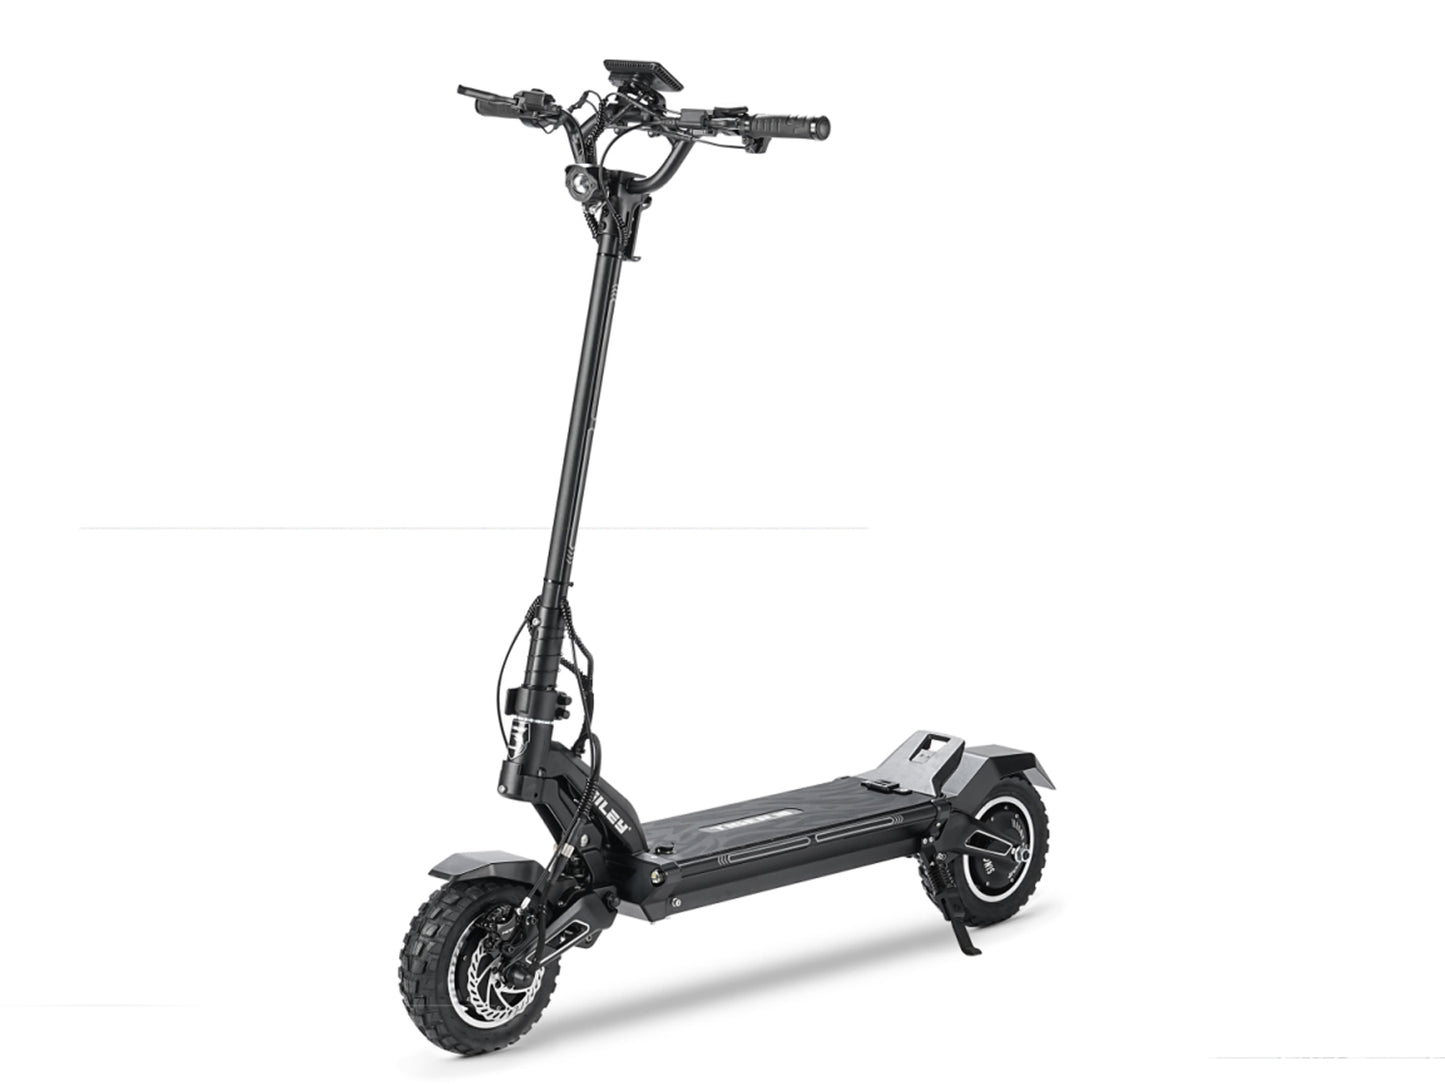 HILEY Tiger10 GTR 1400W*2 Electric Scooter